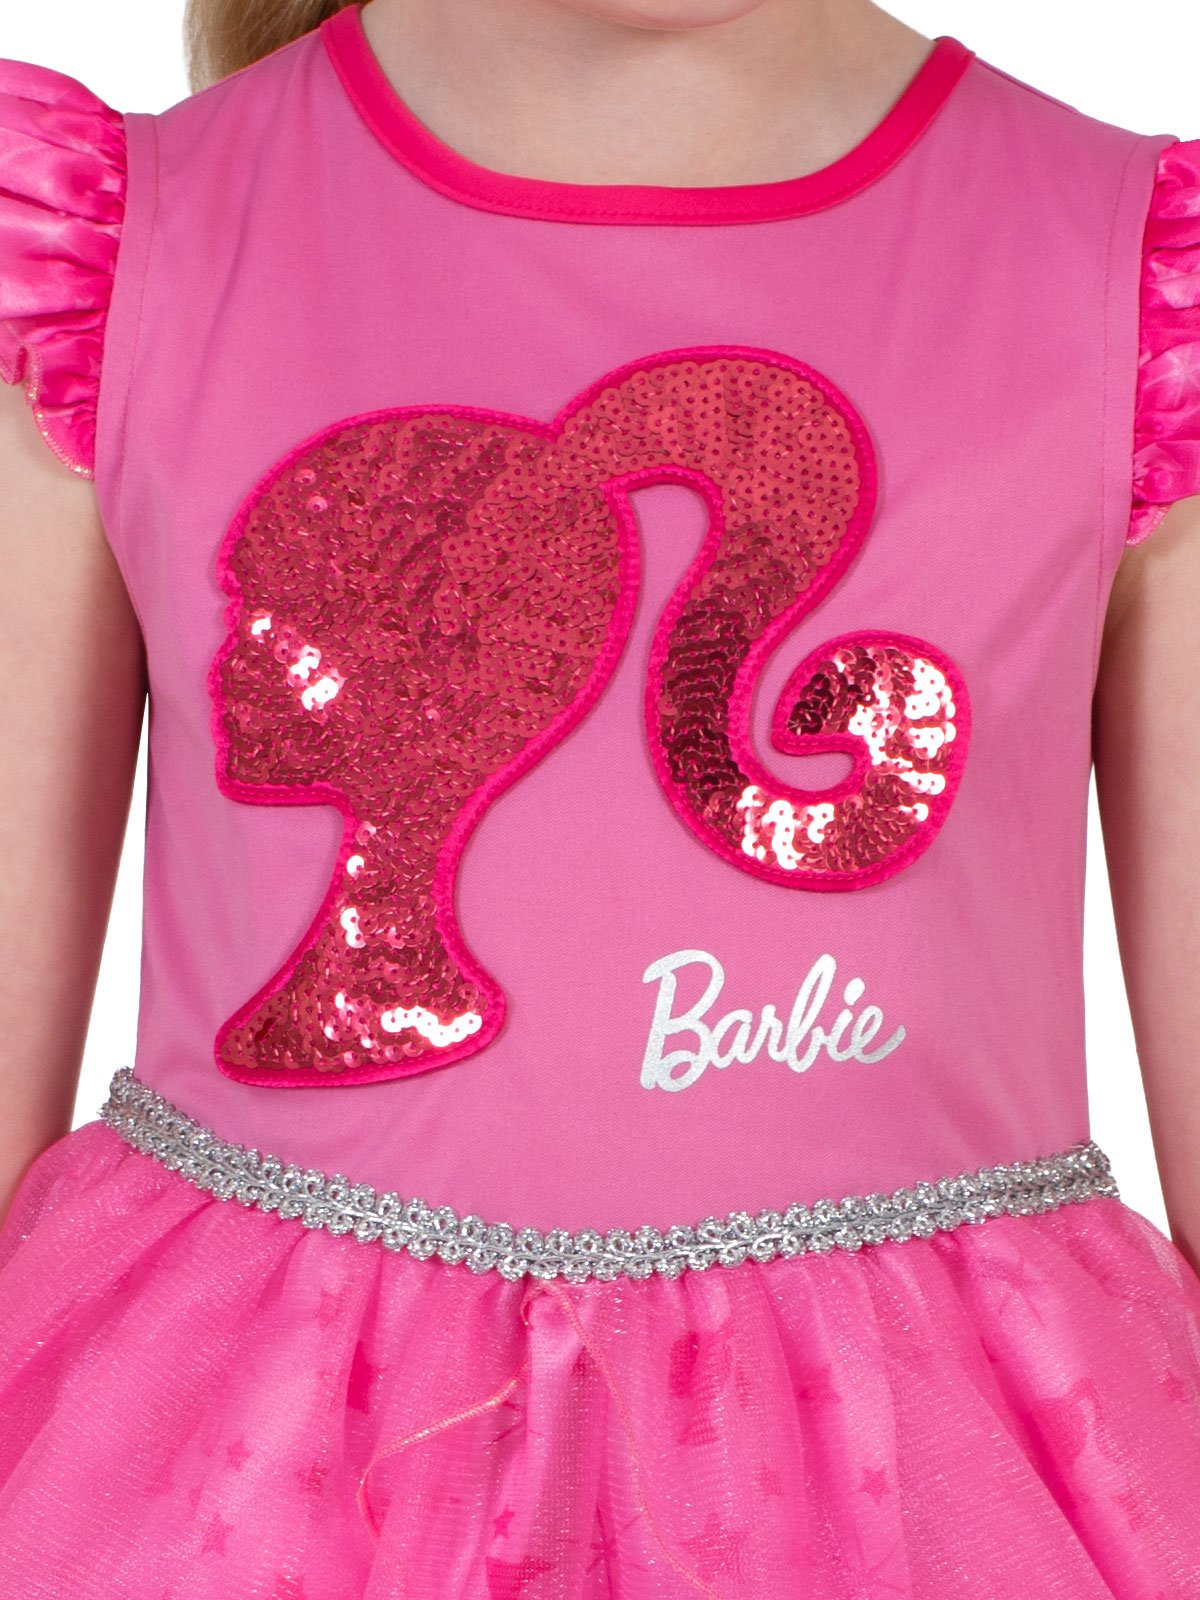 Costume Child Barbie Sparkle Dress Deluxe Size 6-8 Years